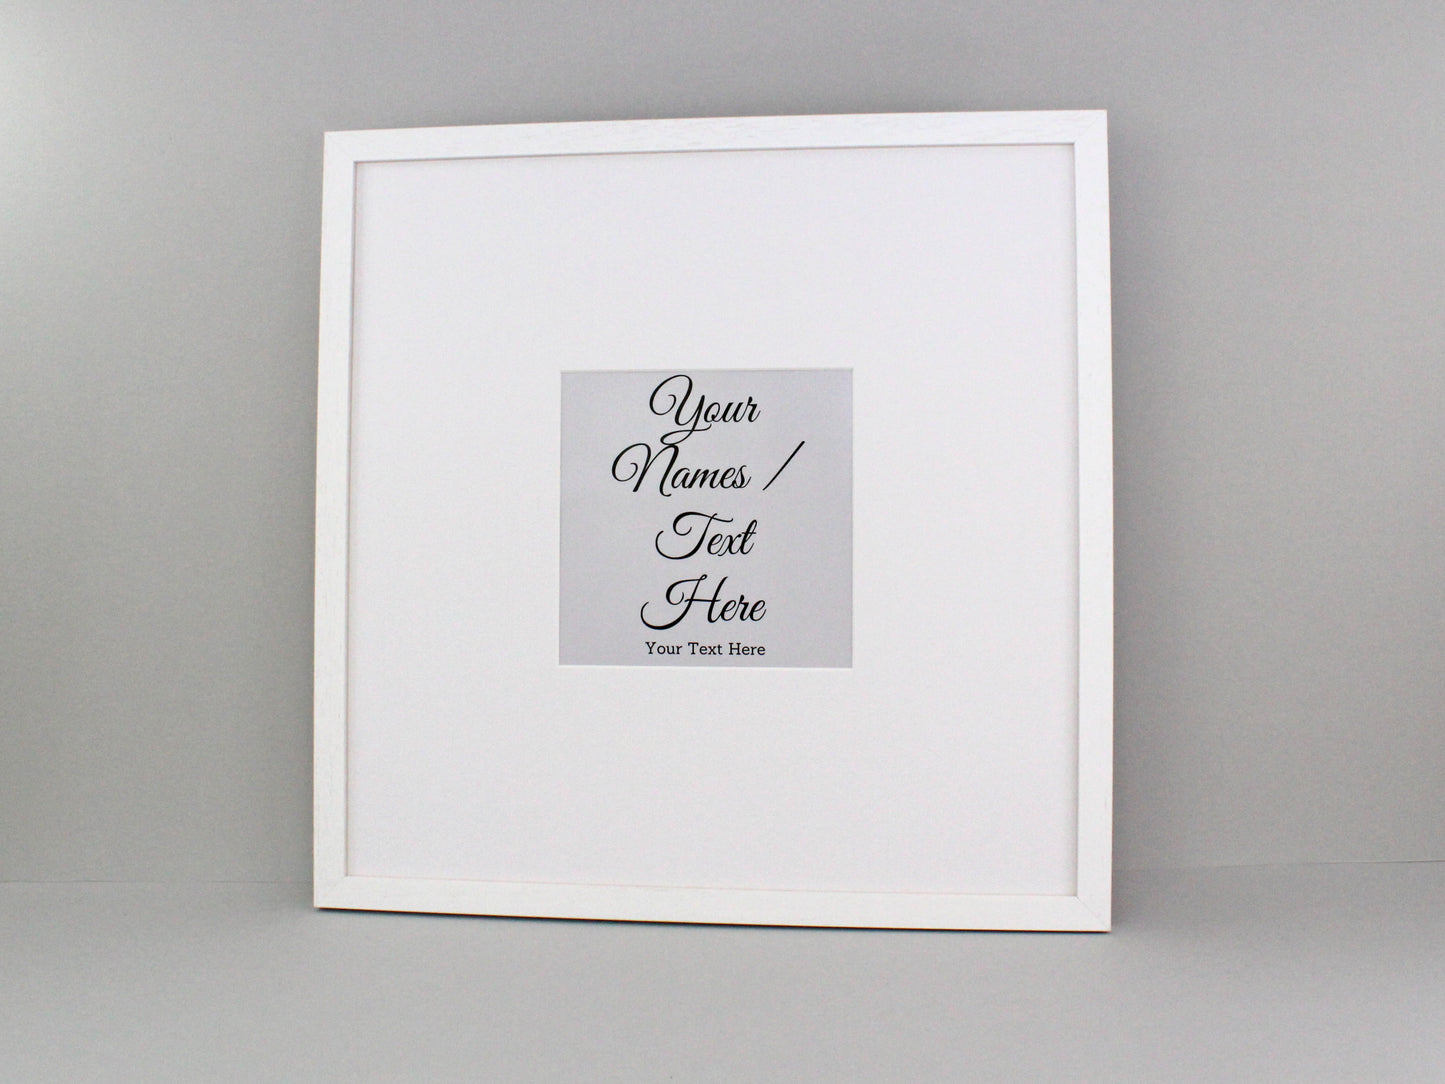 Wedding Signing Frames. 50x50cm. With 8x8inch Aperture for personalised Name/Quote or for a Photo. Wedding Guestbook.